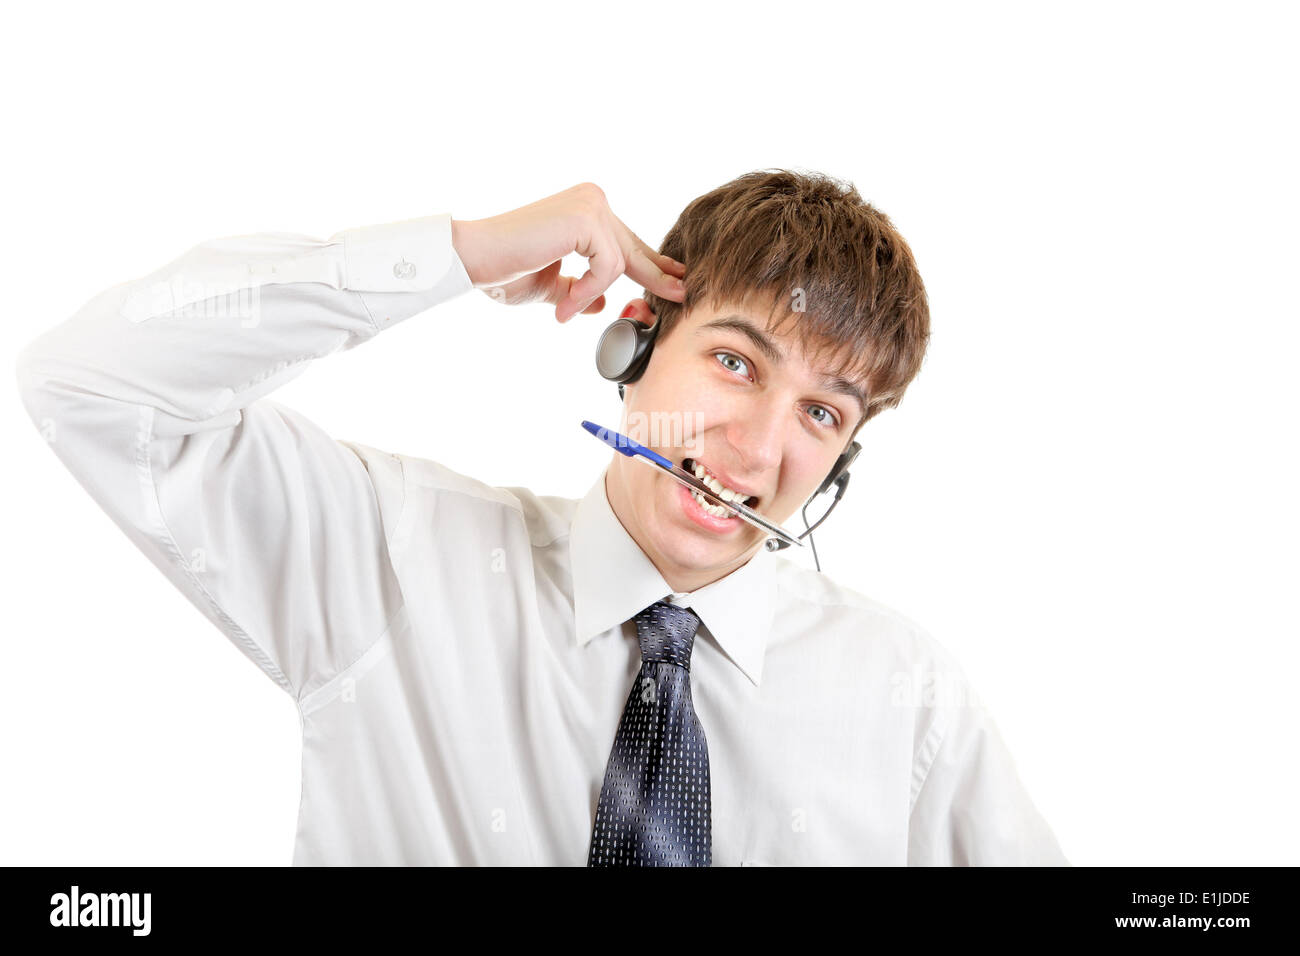 Weary Teenager with Headset Stock Photo